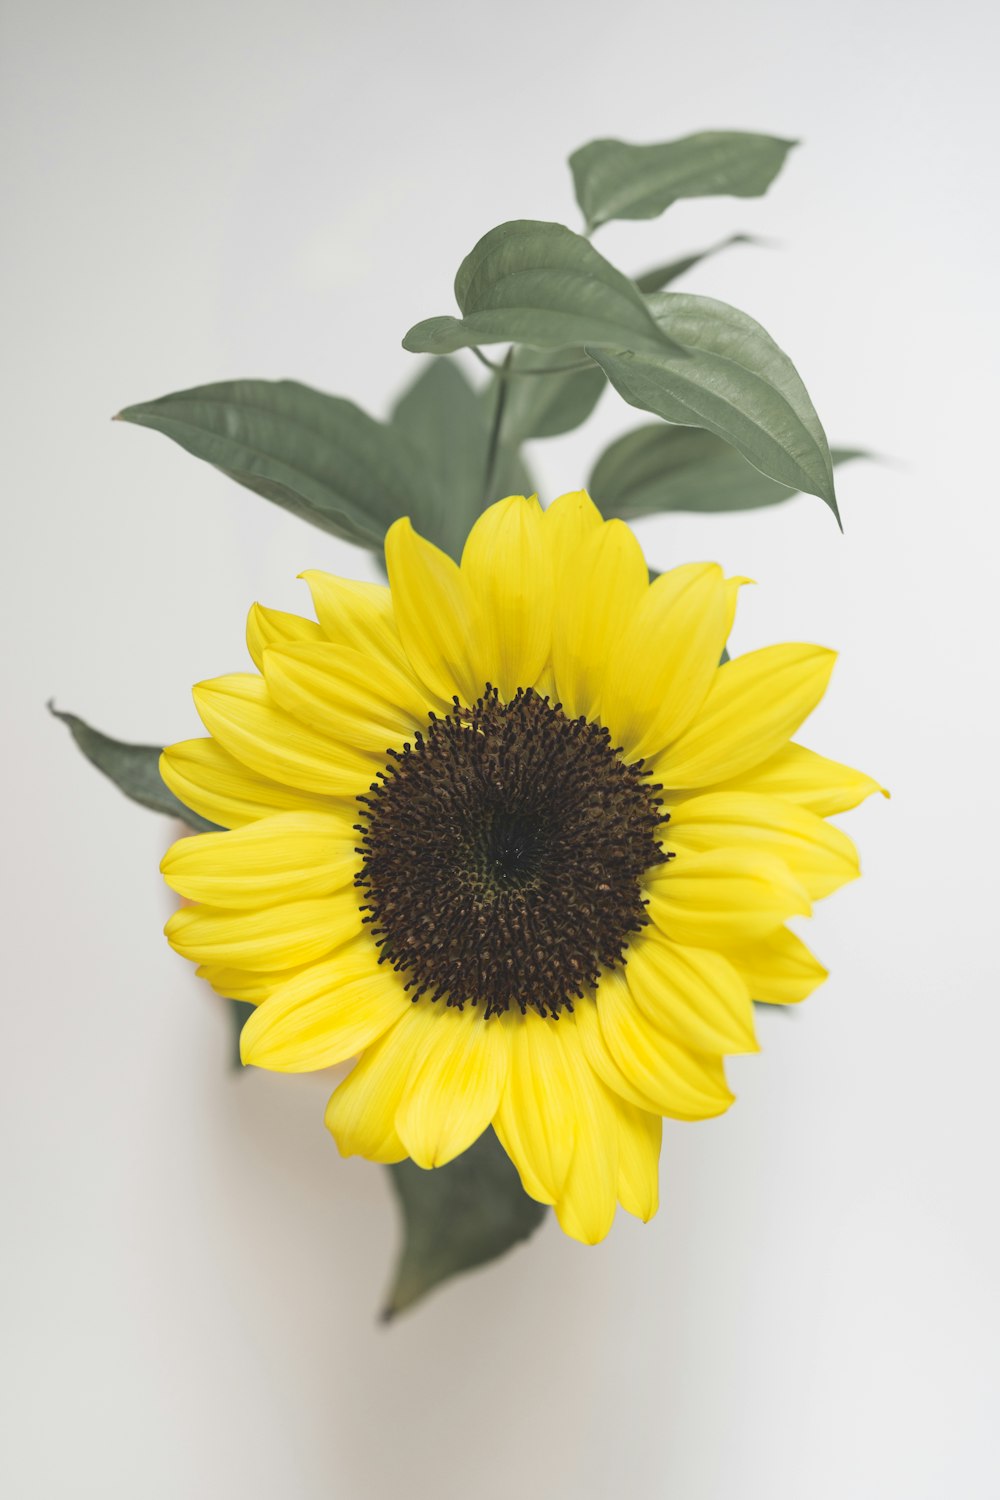 a yellow sunflower with green leaves on a white background